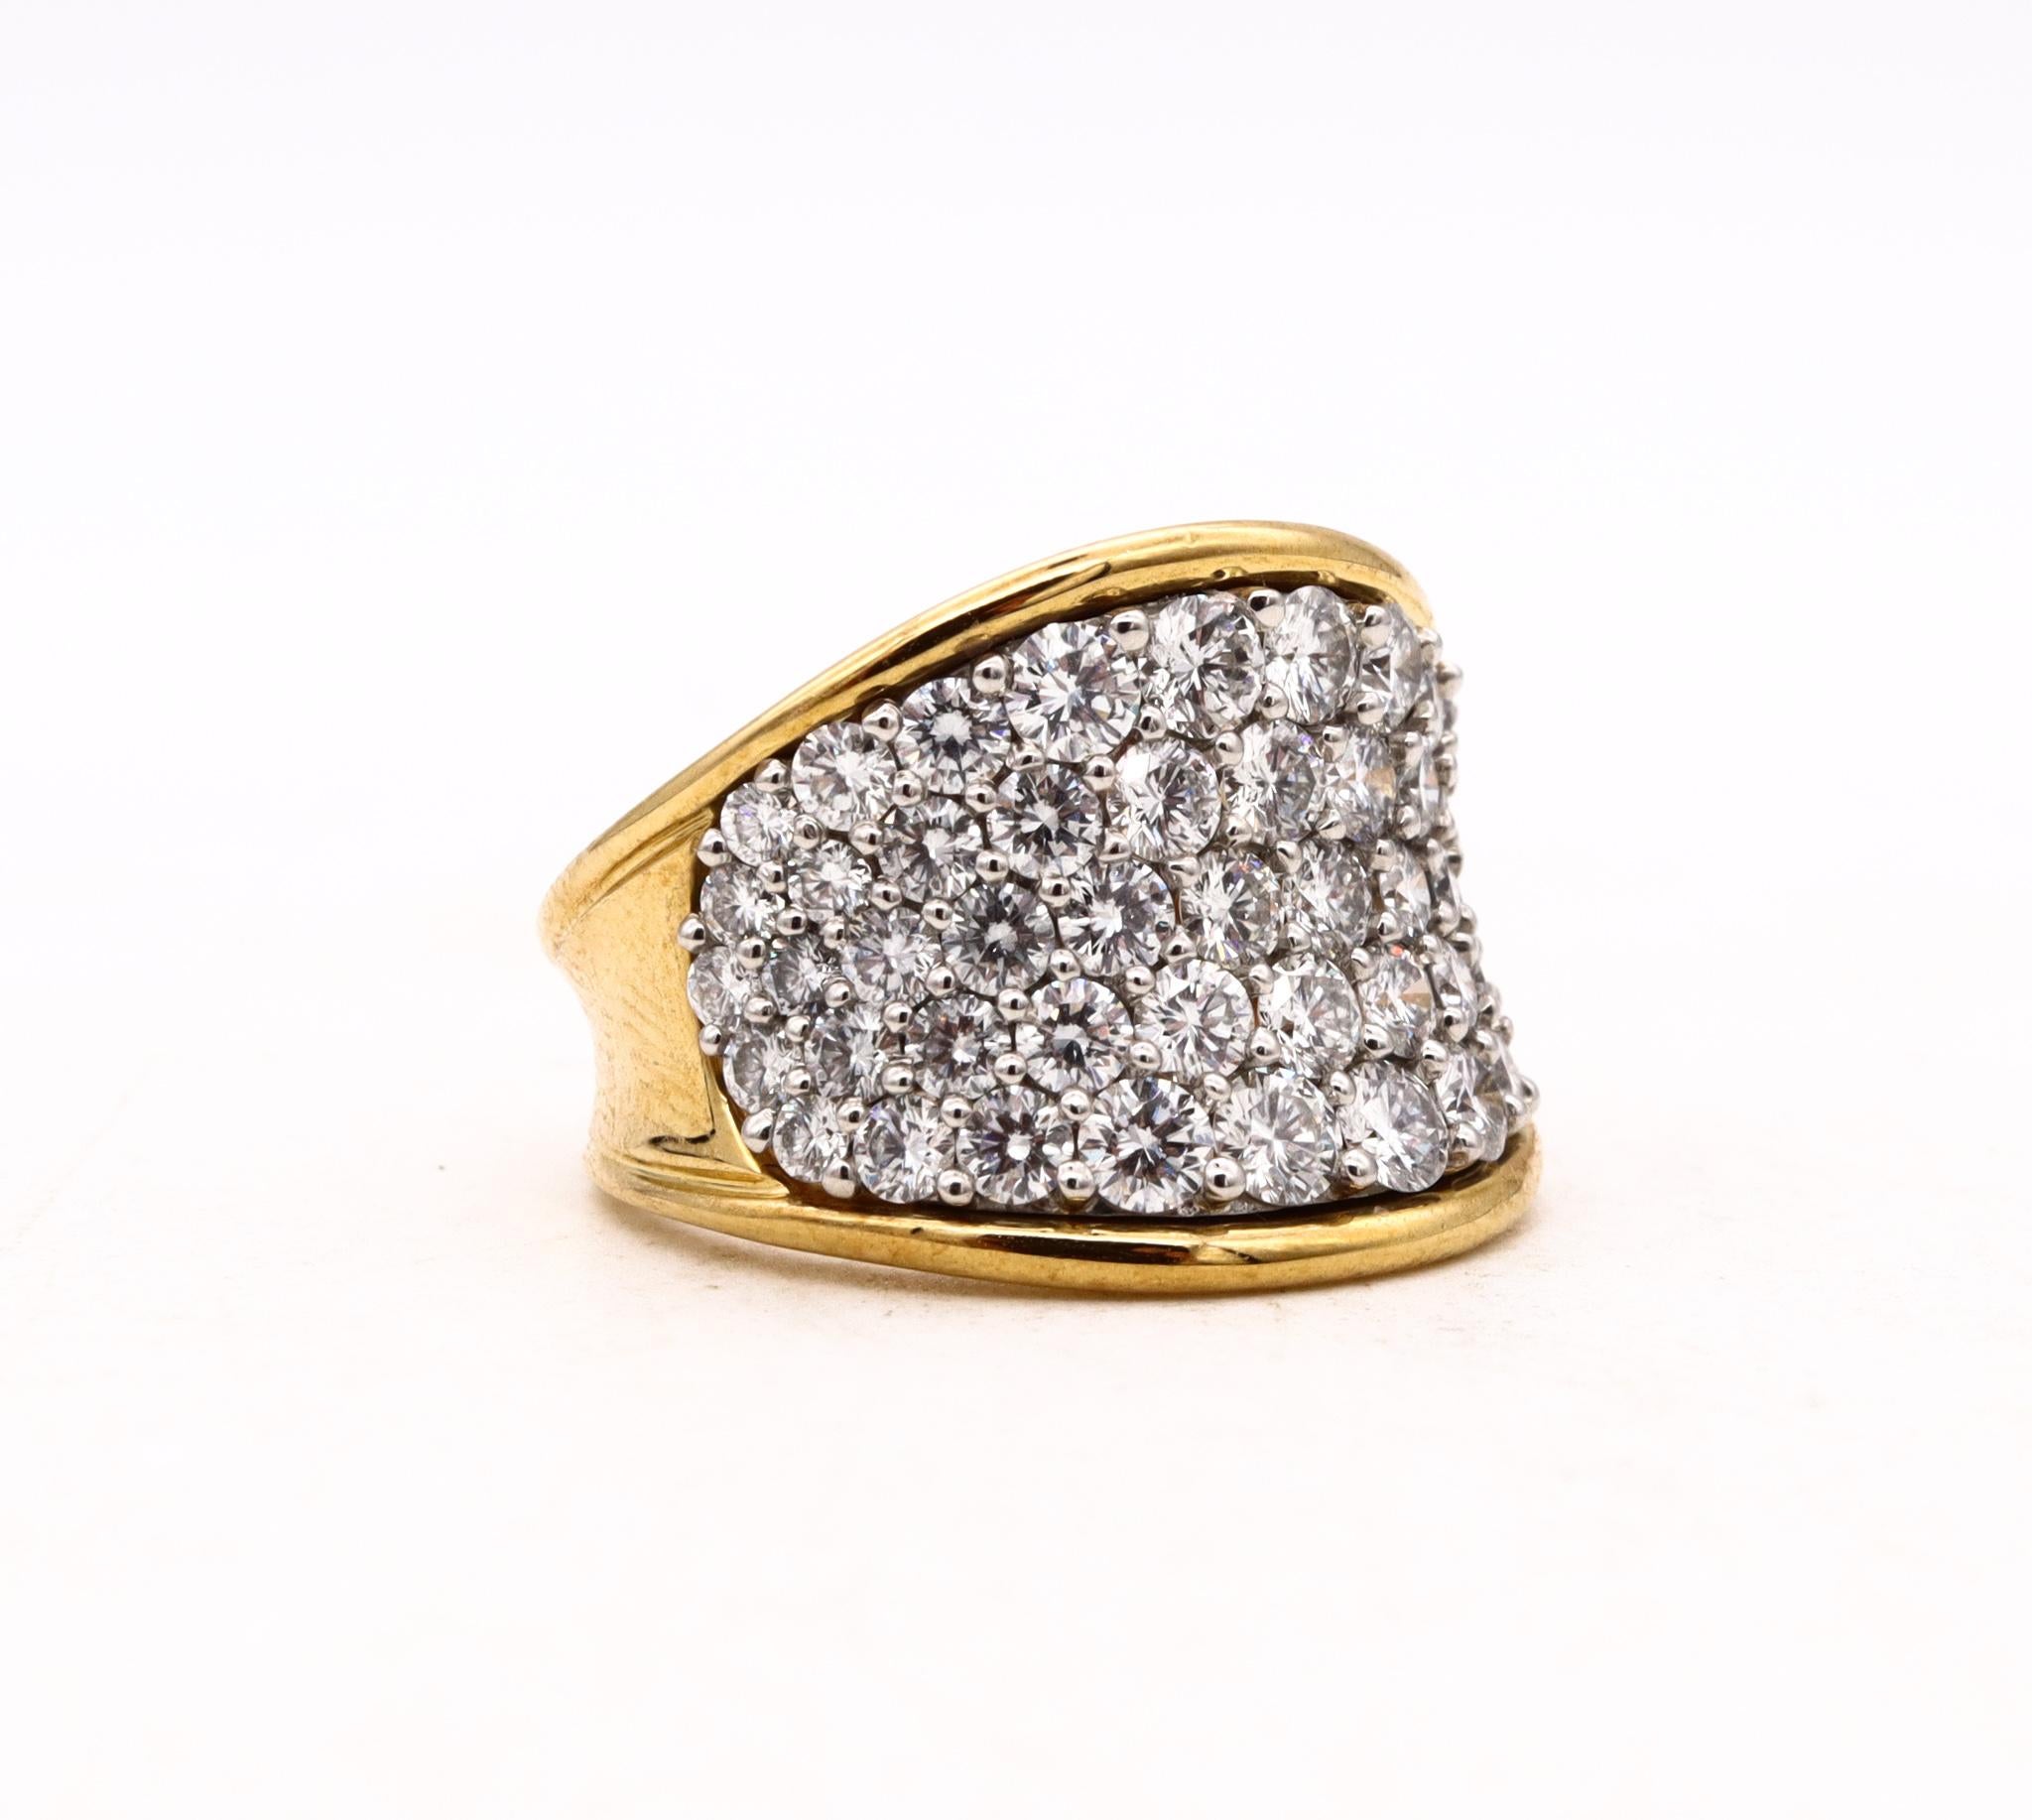 Designer Cluster Ring in Platinum and 18Kt Yellow Gold 3.78 Cts D VS Diamonds For Sale 1